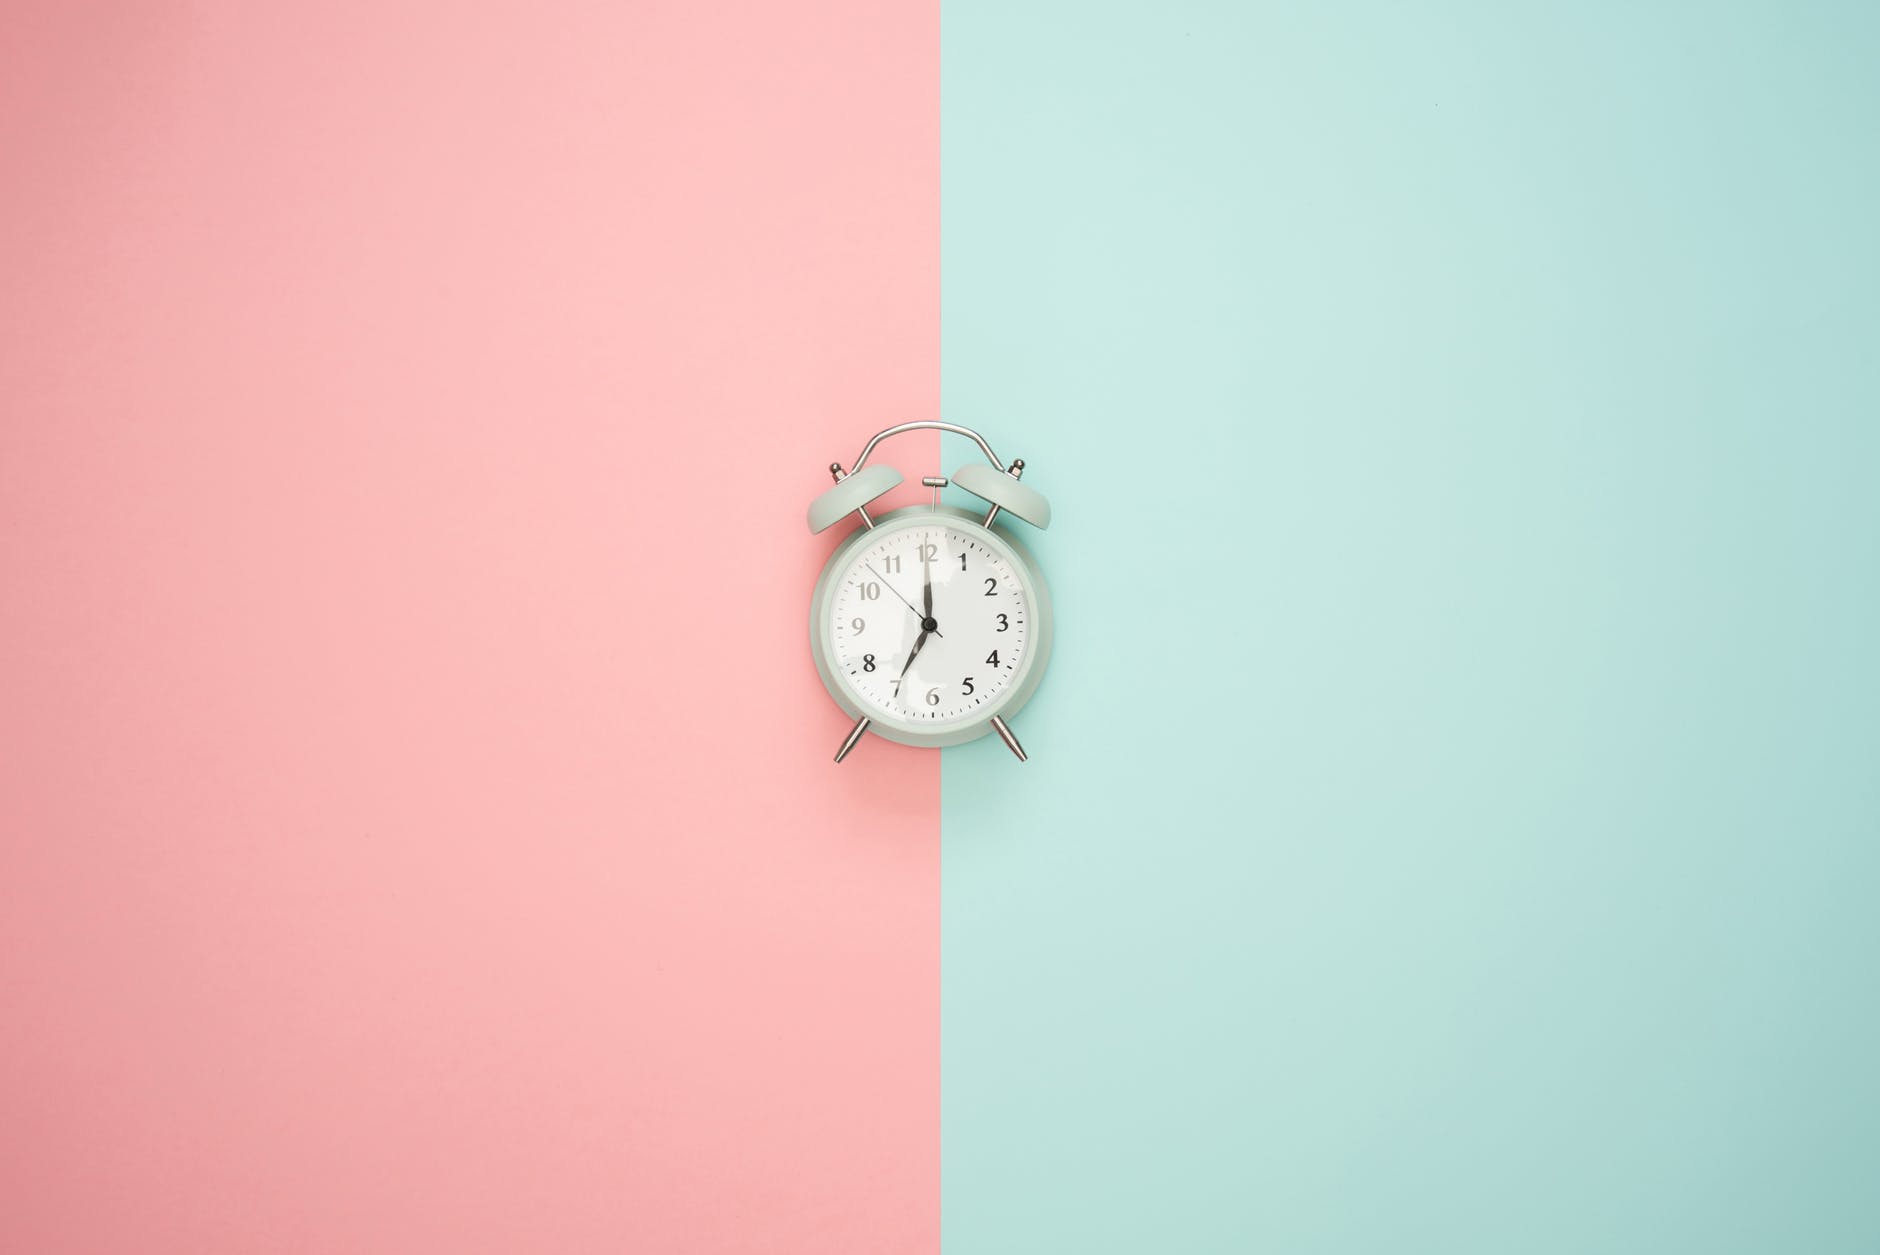 Managing Your Time Effectively